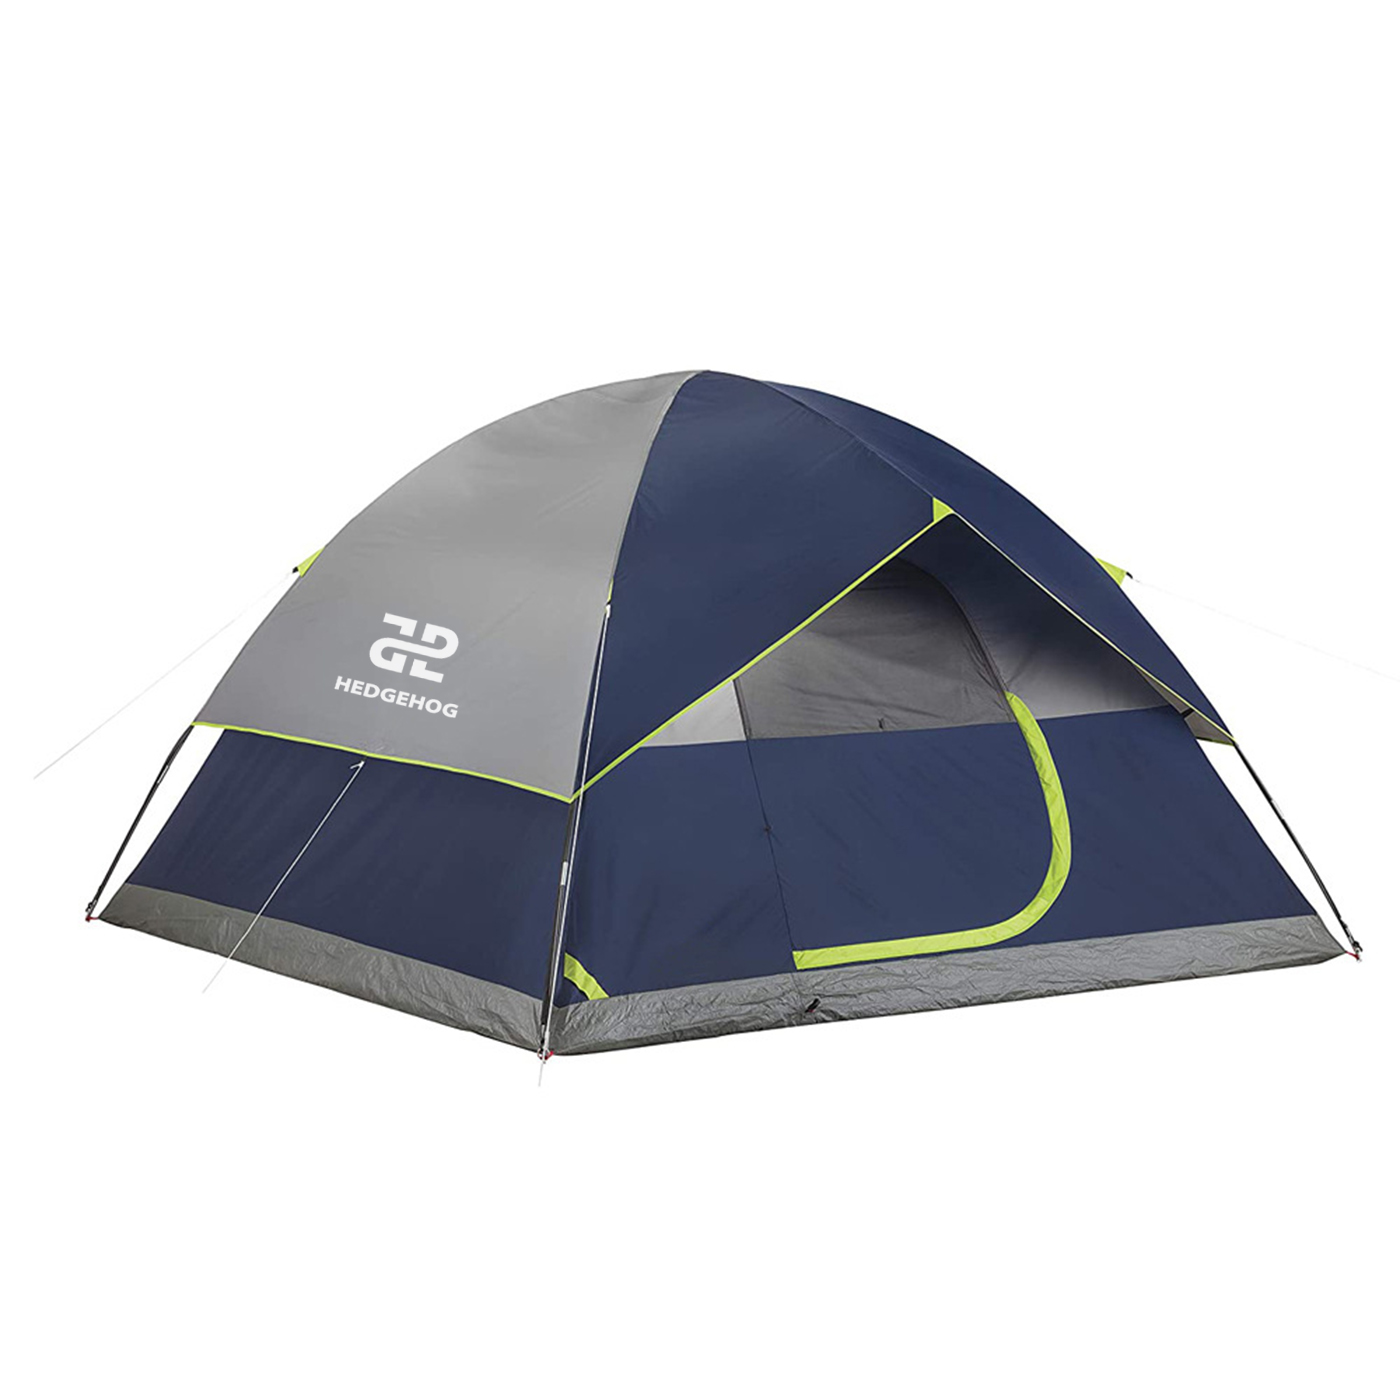 2 Person Camping Dome Tent